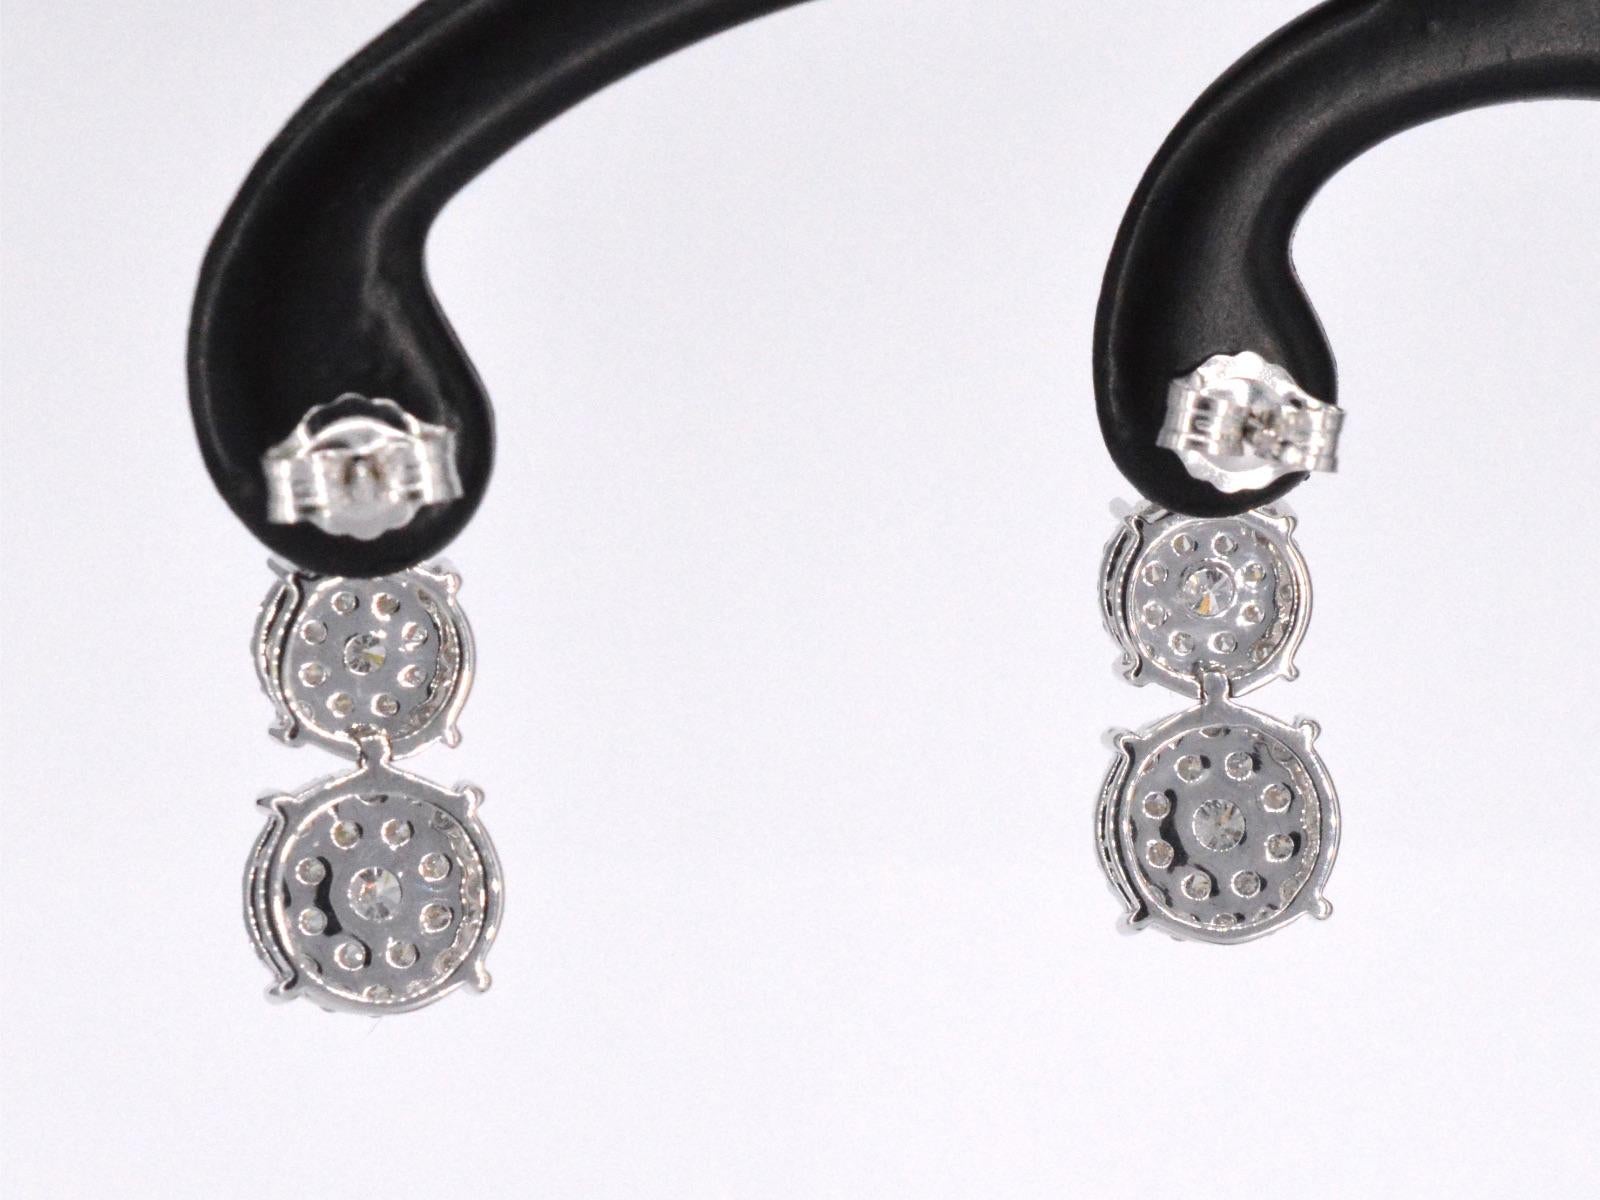 Women's White Gold Earrings with Three Chatons of Diamonds below Each Other For Sale